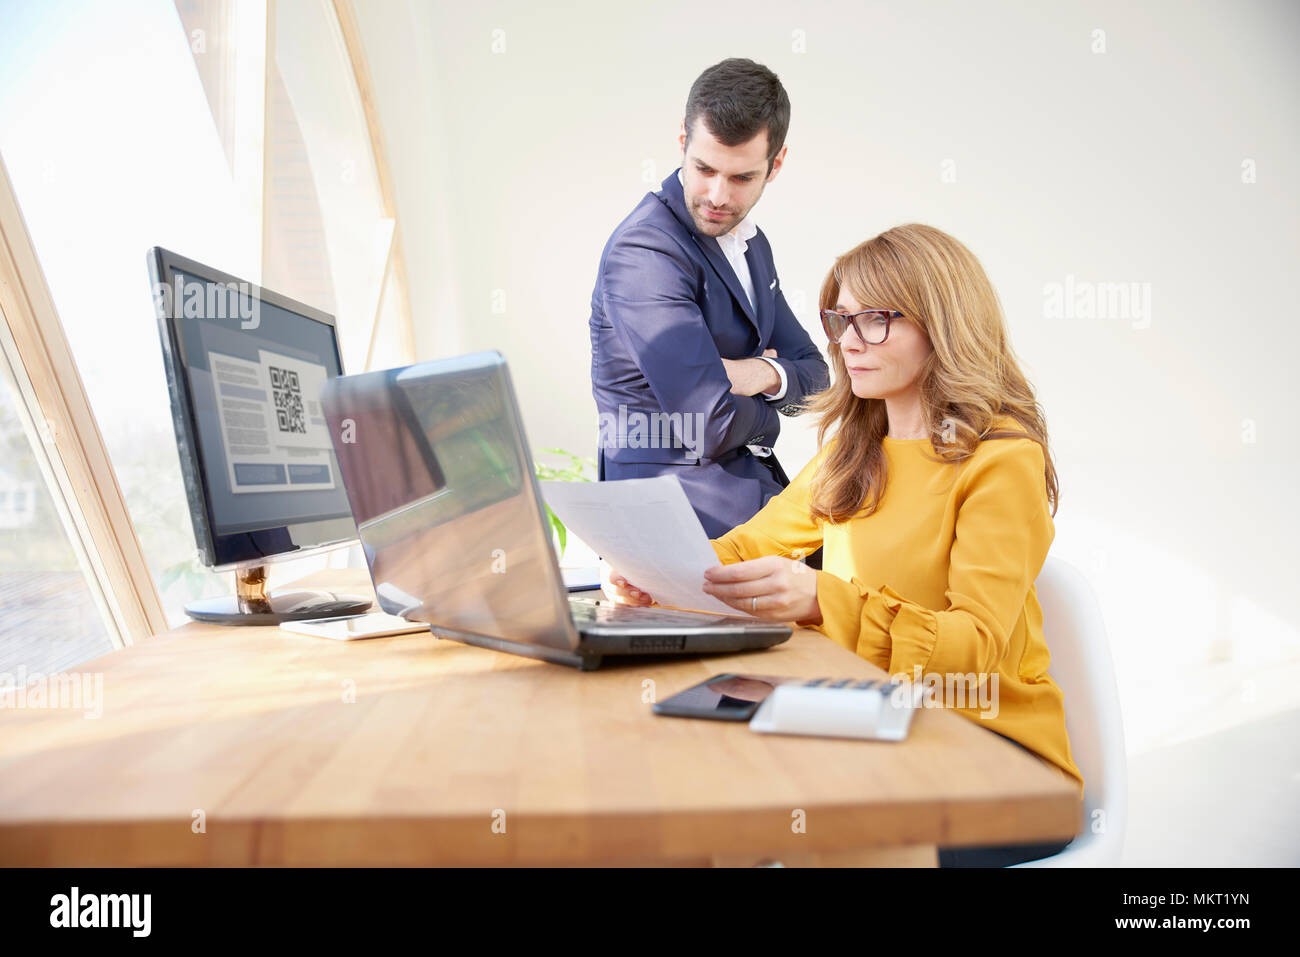 Middle aged businesswoman sitting at office desk and holding a document in her hands while young financial assistant businessman standing next to her  Stock Photo